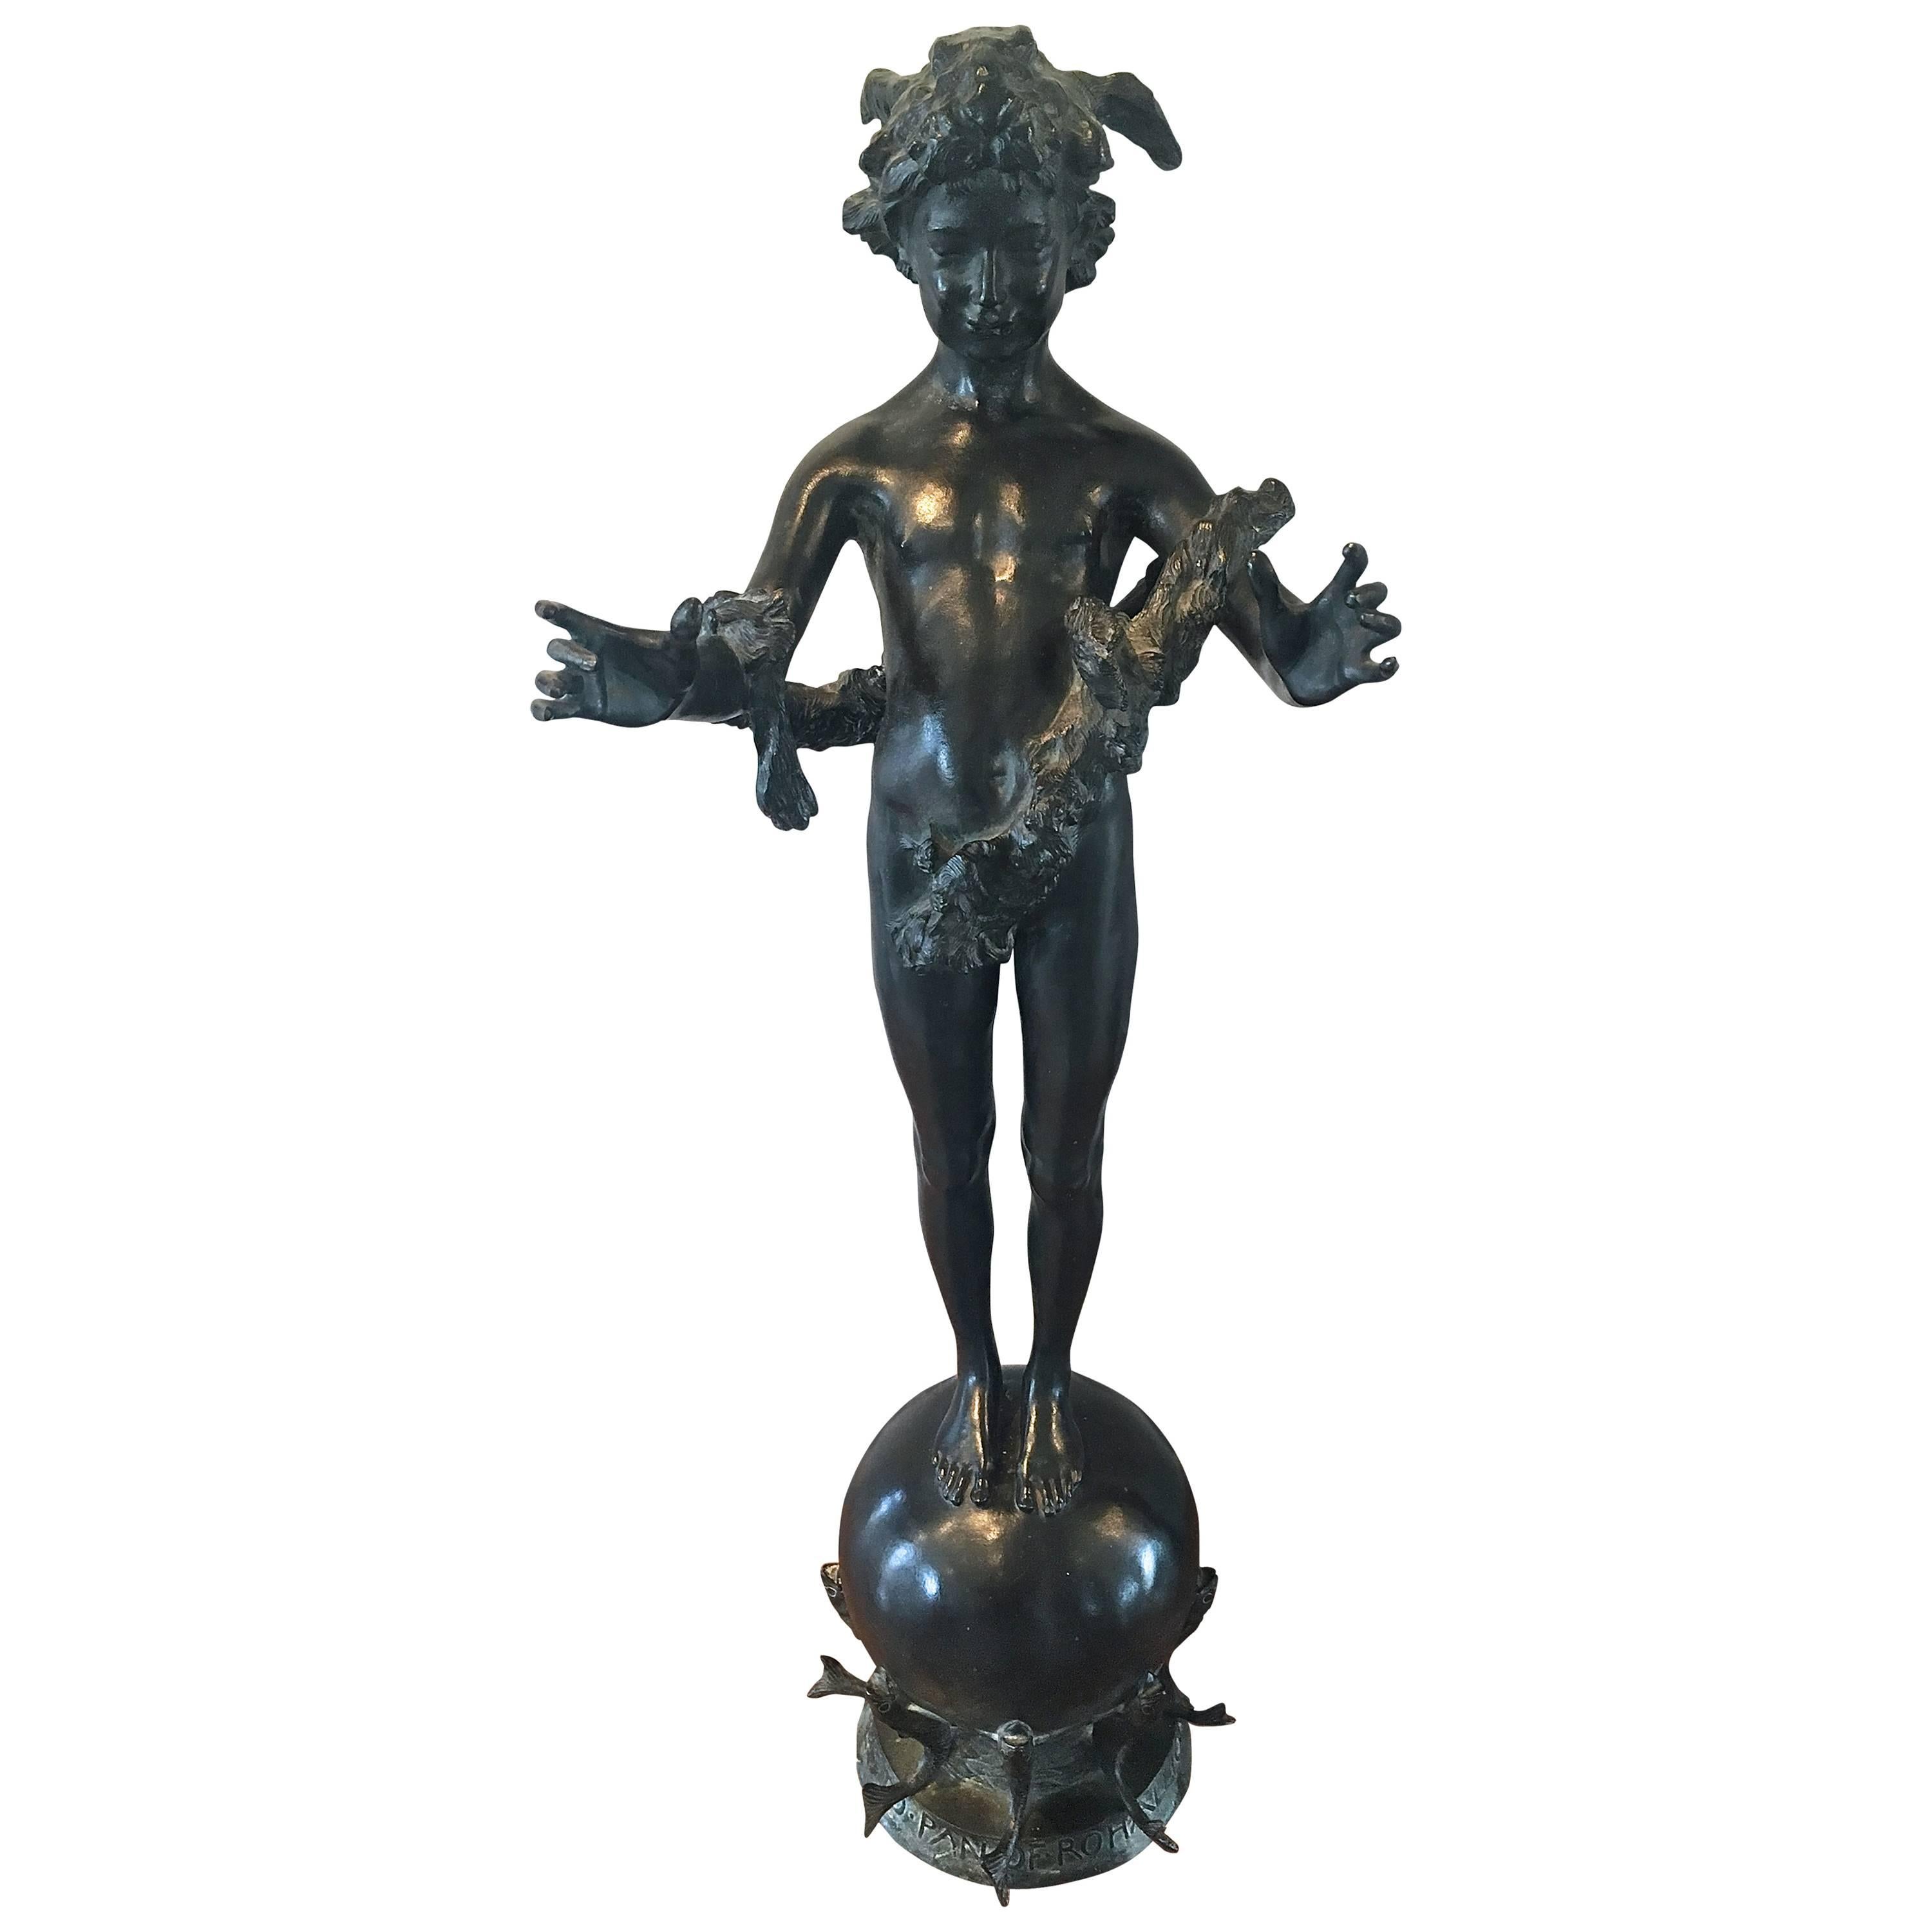 Bronze Sculpture "Pan of Rohallion" by Frederick William MacMonnies, 1890